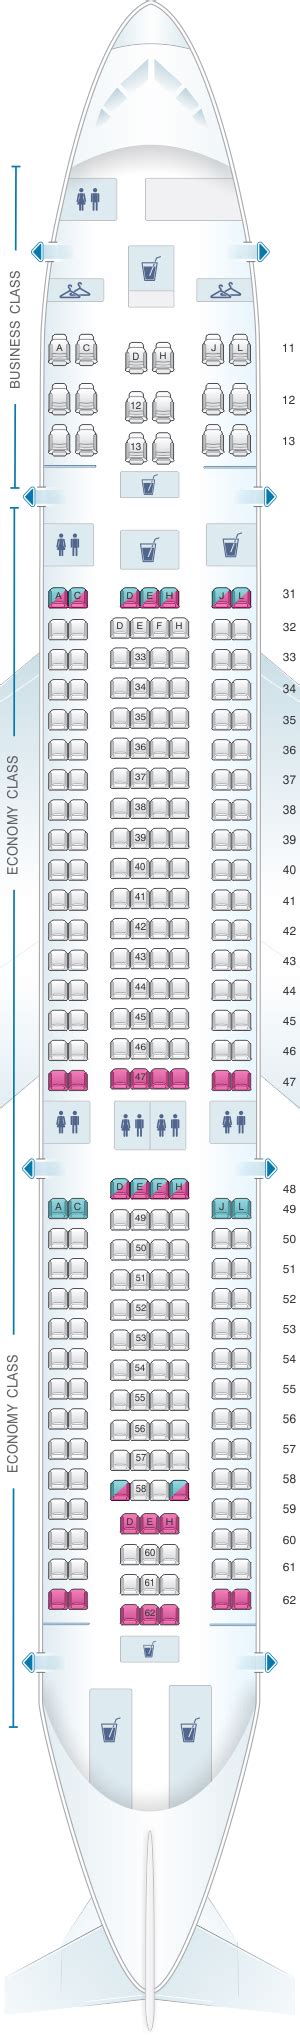 China Airlines A330 Seat Map